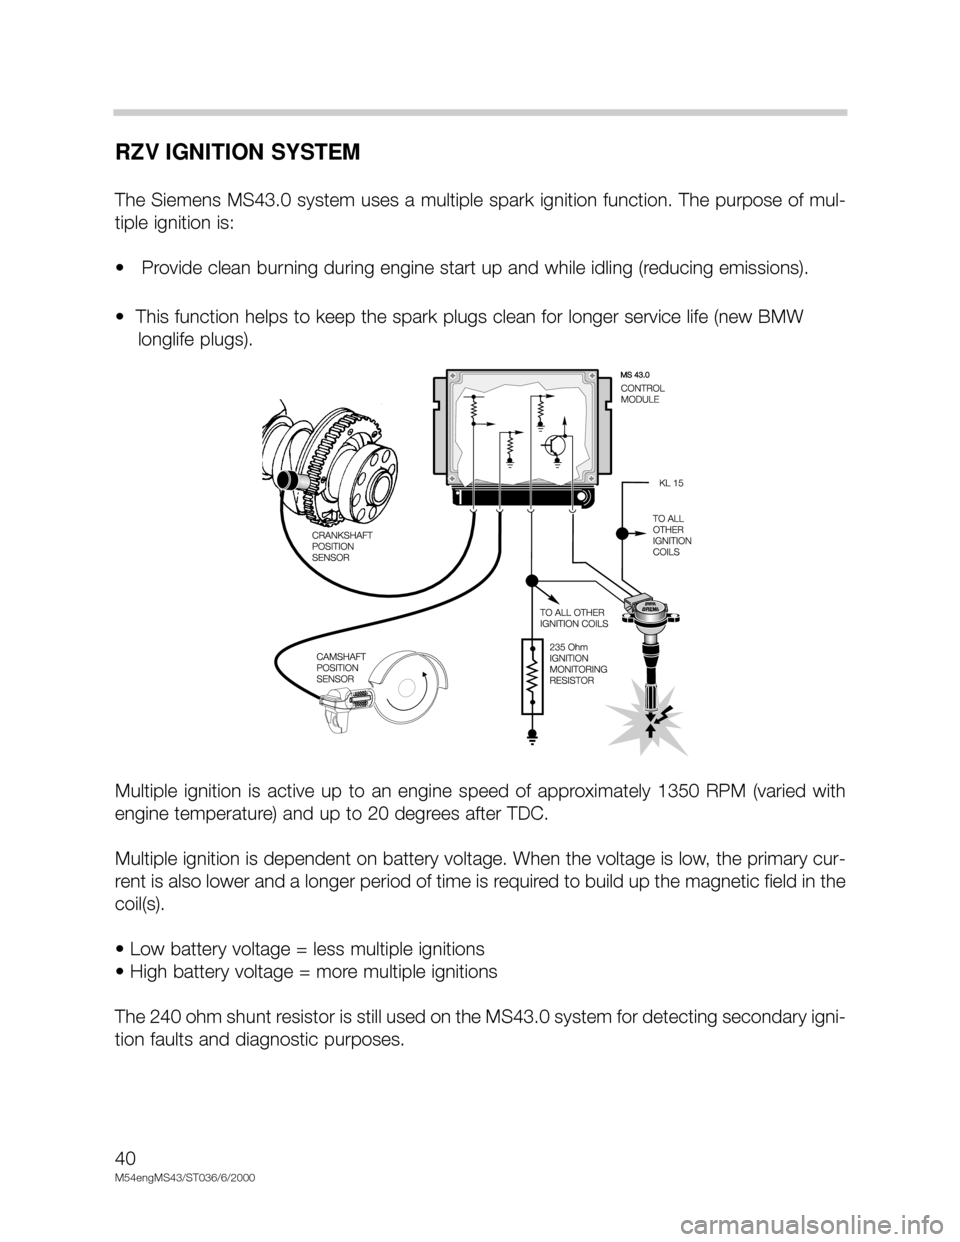 BMW X5 2005 E53 M54 Engine Owners Guide 40
M54engMS43/ST036/6/2000
RZV IGNITION SYSTEM
The Siemens MS43.0 system uses a multiple spark ignition function. The purpose of mul-
tiple ignition is:
•   Provide clean burning during engine start